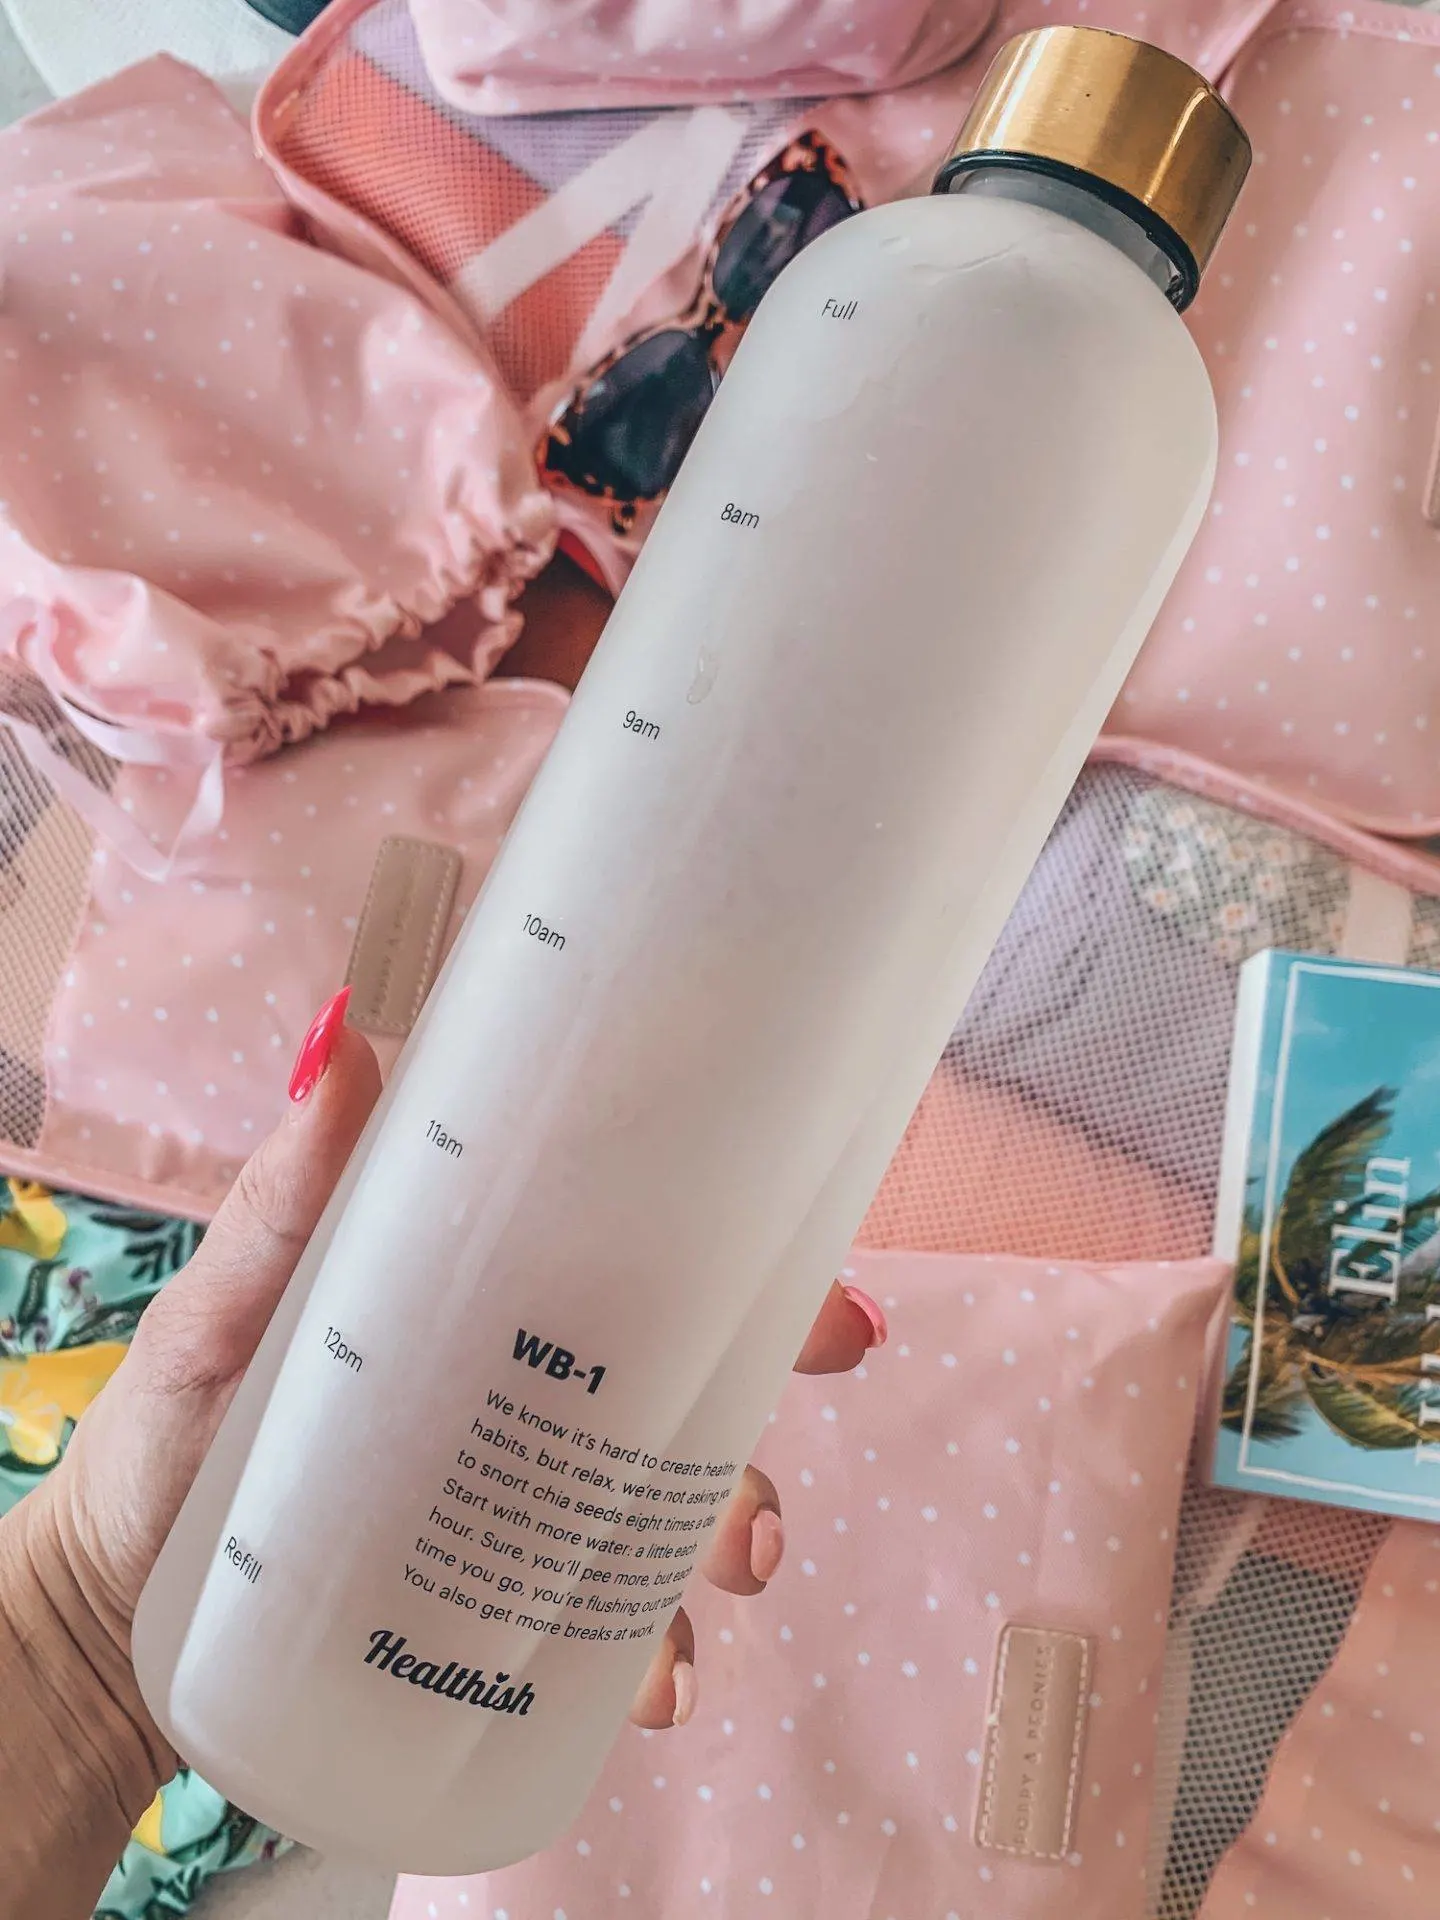 Headed for a trip to Florida and don’t know what to bring? I’ve got you covered. This post includes everything you need to pack for a trip to Florida and includes a printable packing checklist! 

Pictured here: #29 Refillable Water Bottle